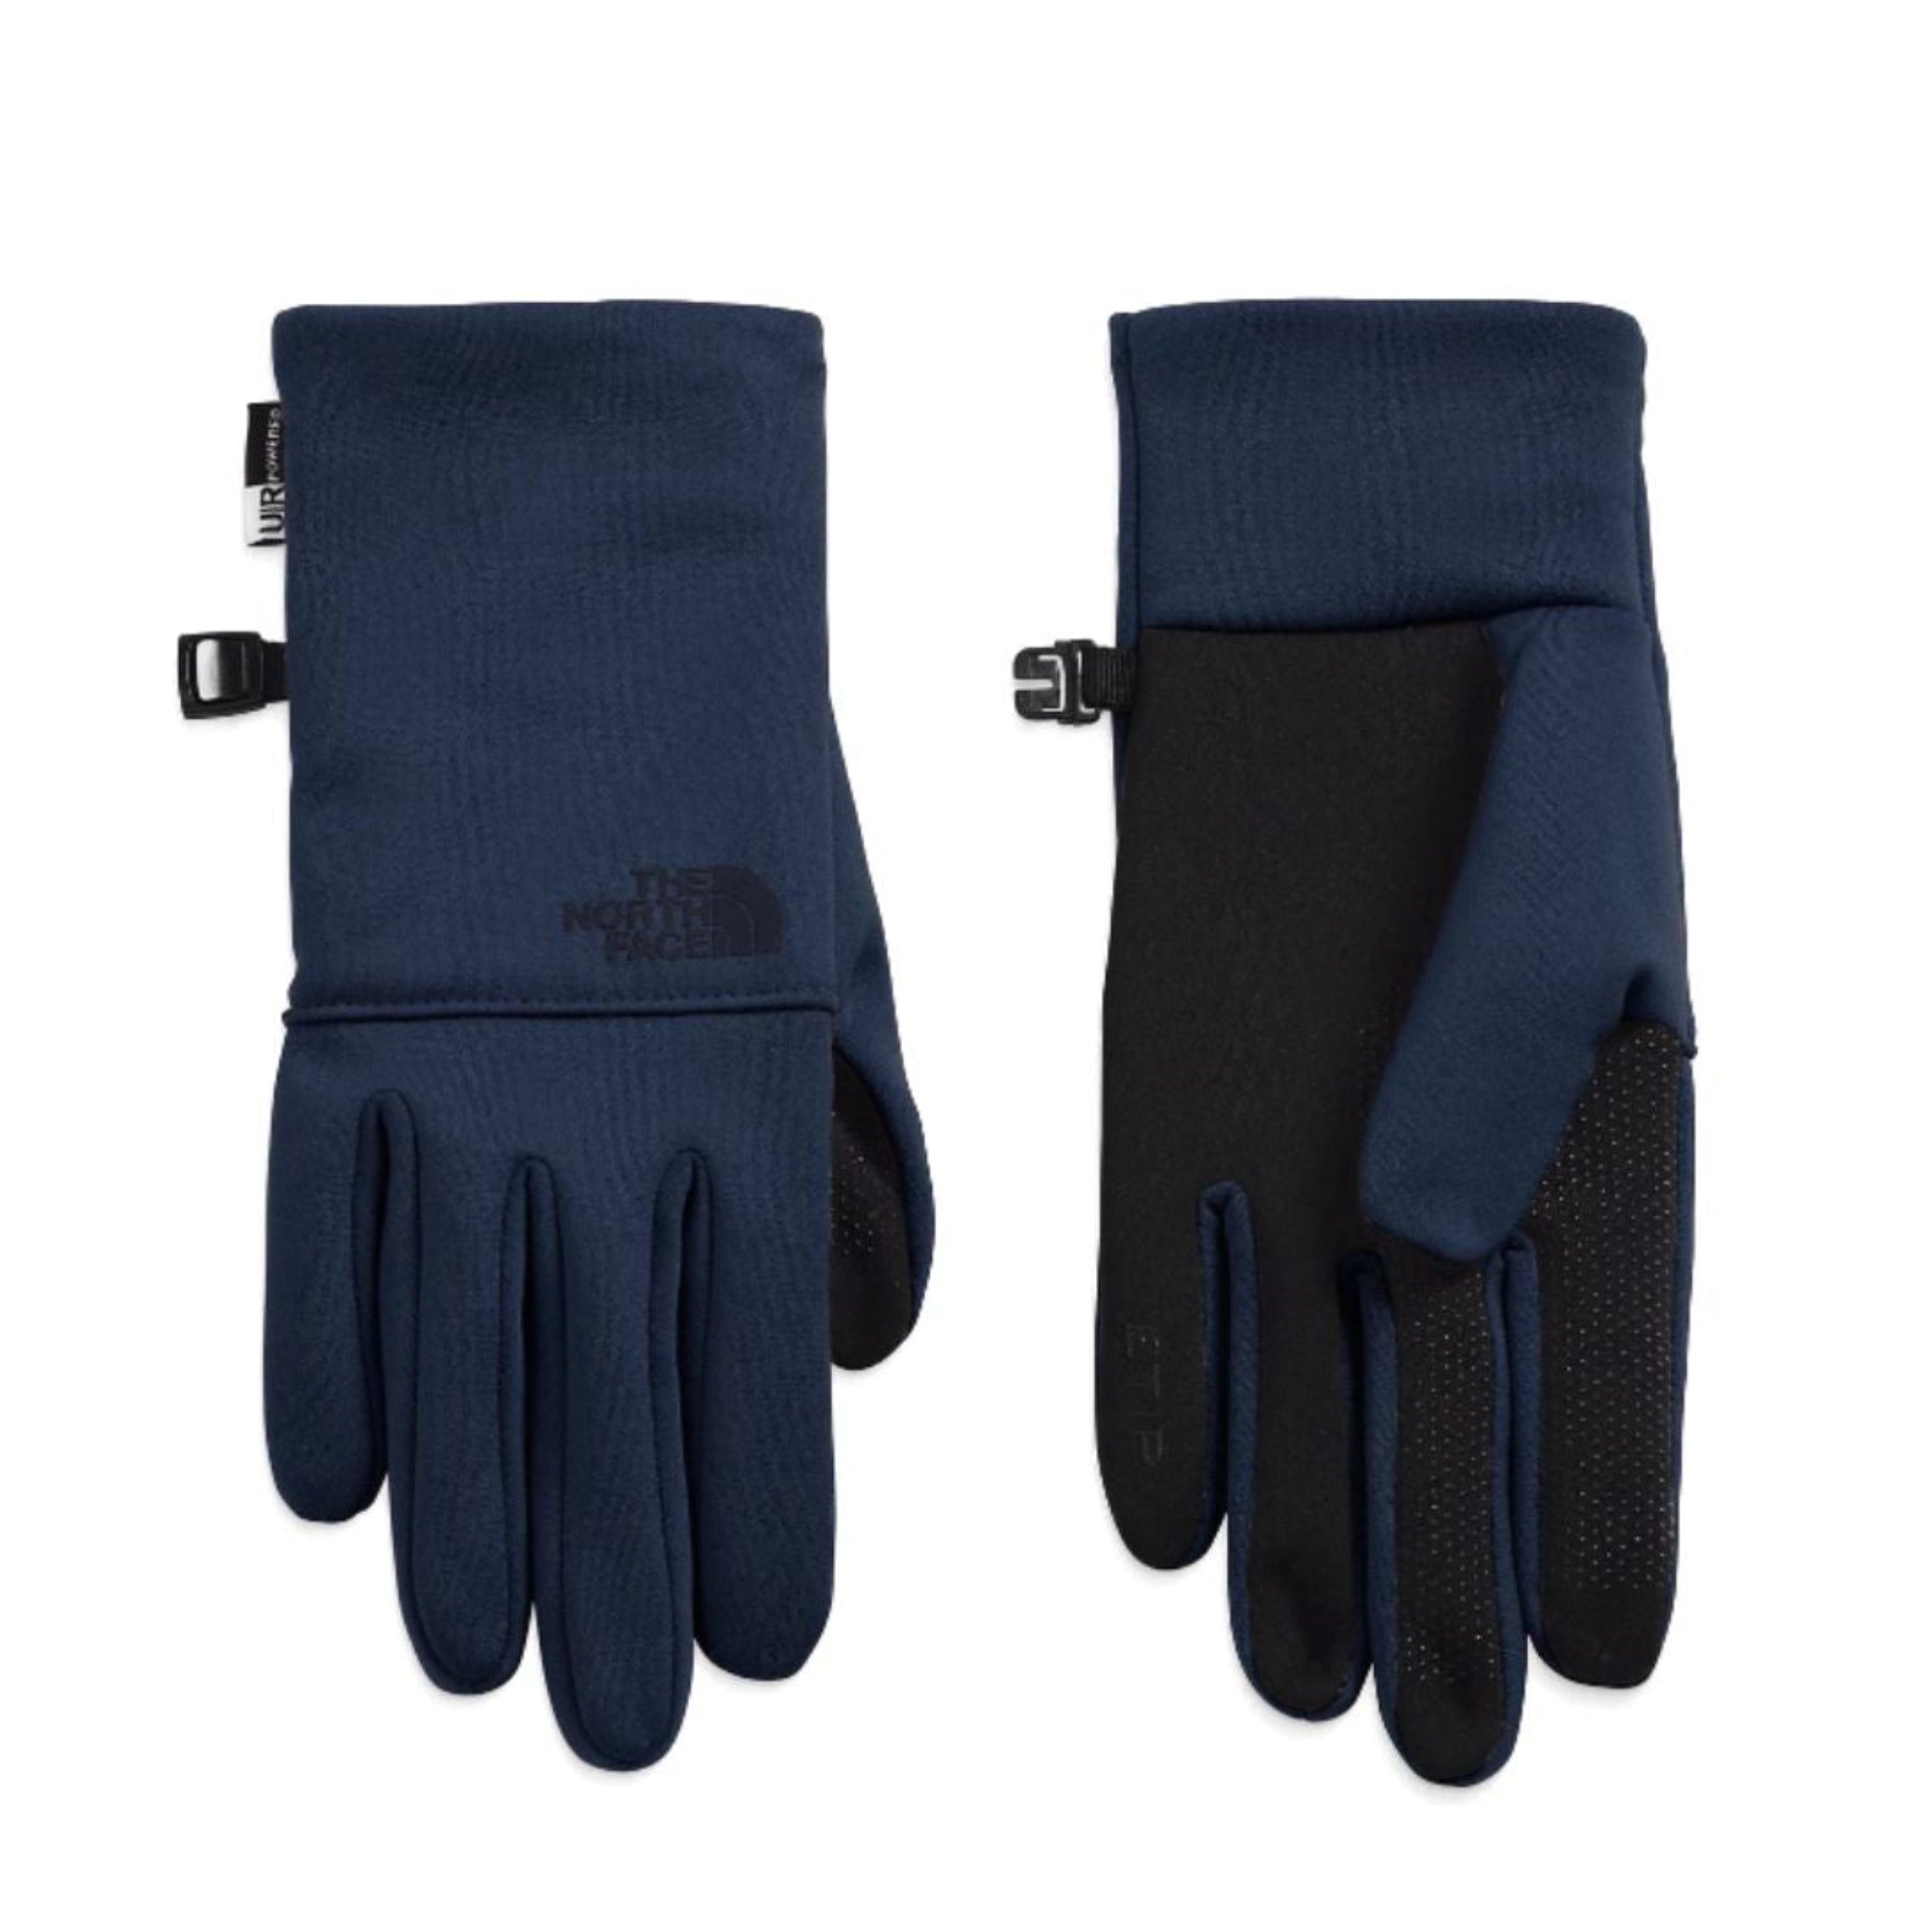 The North Face, Etip™ Recycled Glove, Unisex, Summit Navy